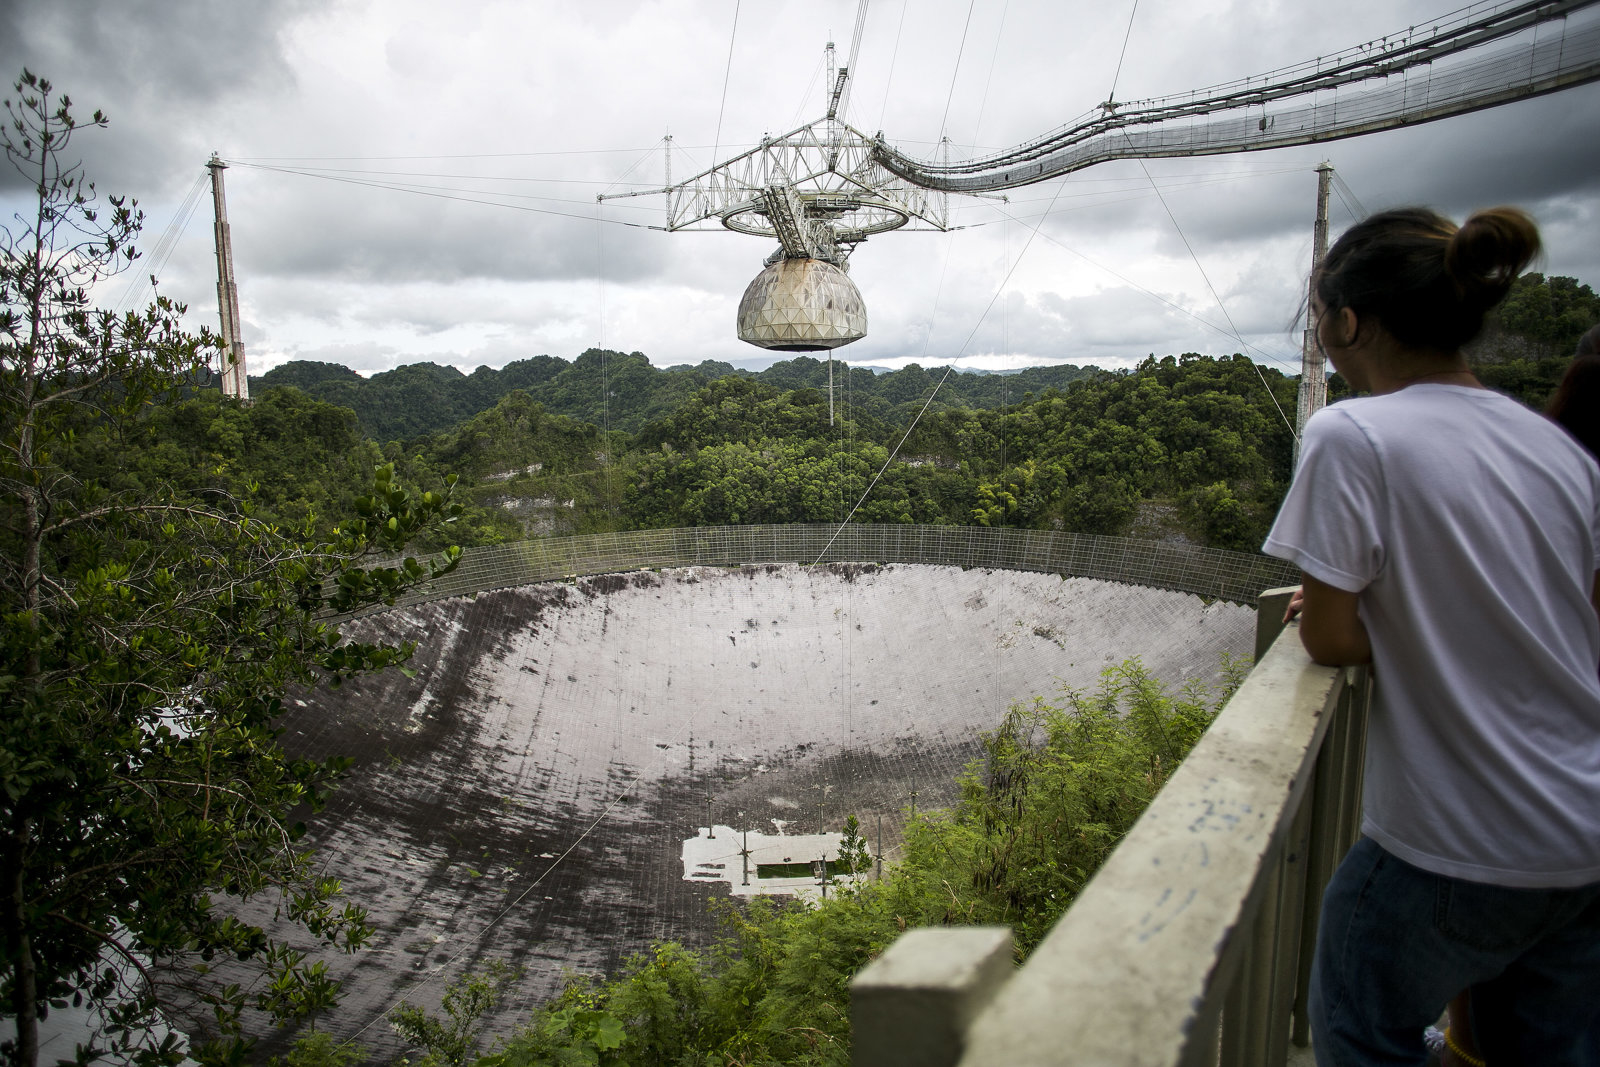 A visitor views the world's largest single dish radio telescope at the Arecibo Observatory in Arecibo, Puerto Rico, on Friday, Aug. 25, 2017. Over the years,Â Puerto RicoÂ has wooed visitors and investors with beaches, sun, tax breaks and splashy public works. Now the Caribbean island wants to add an outpost of Chinese culture, complete with graceful pavilions and regional cuisine. Photographer: Xavier Garcia/Bloomberg via Getty Images